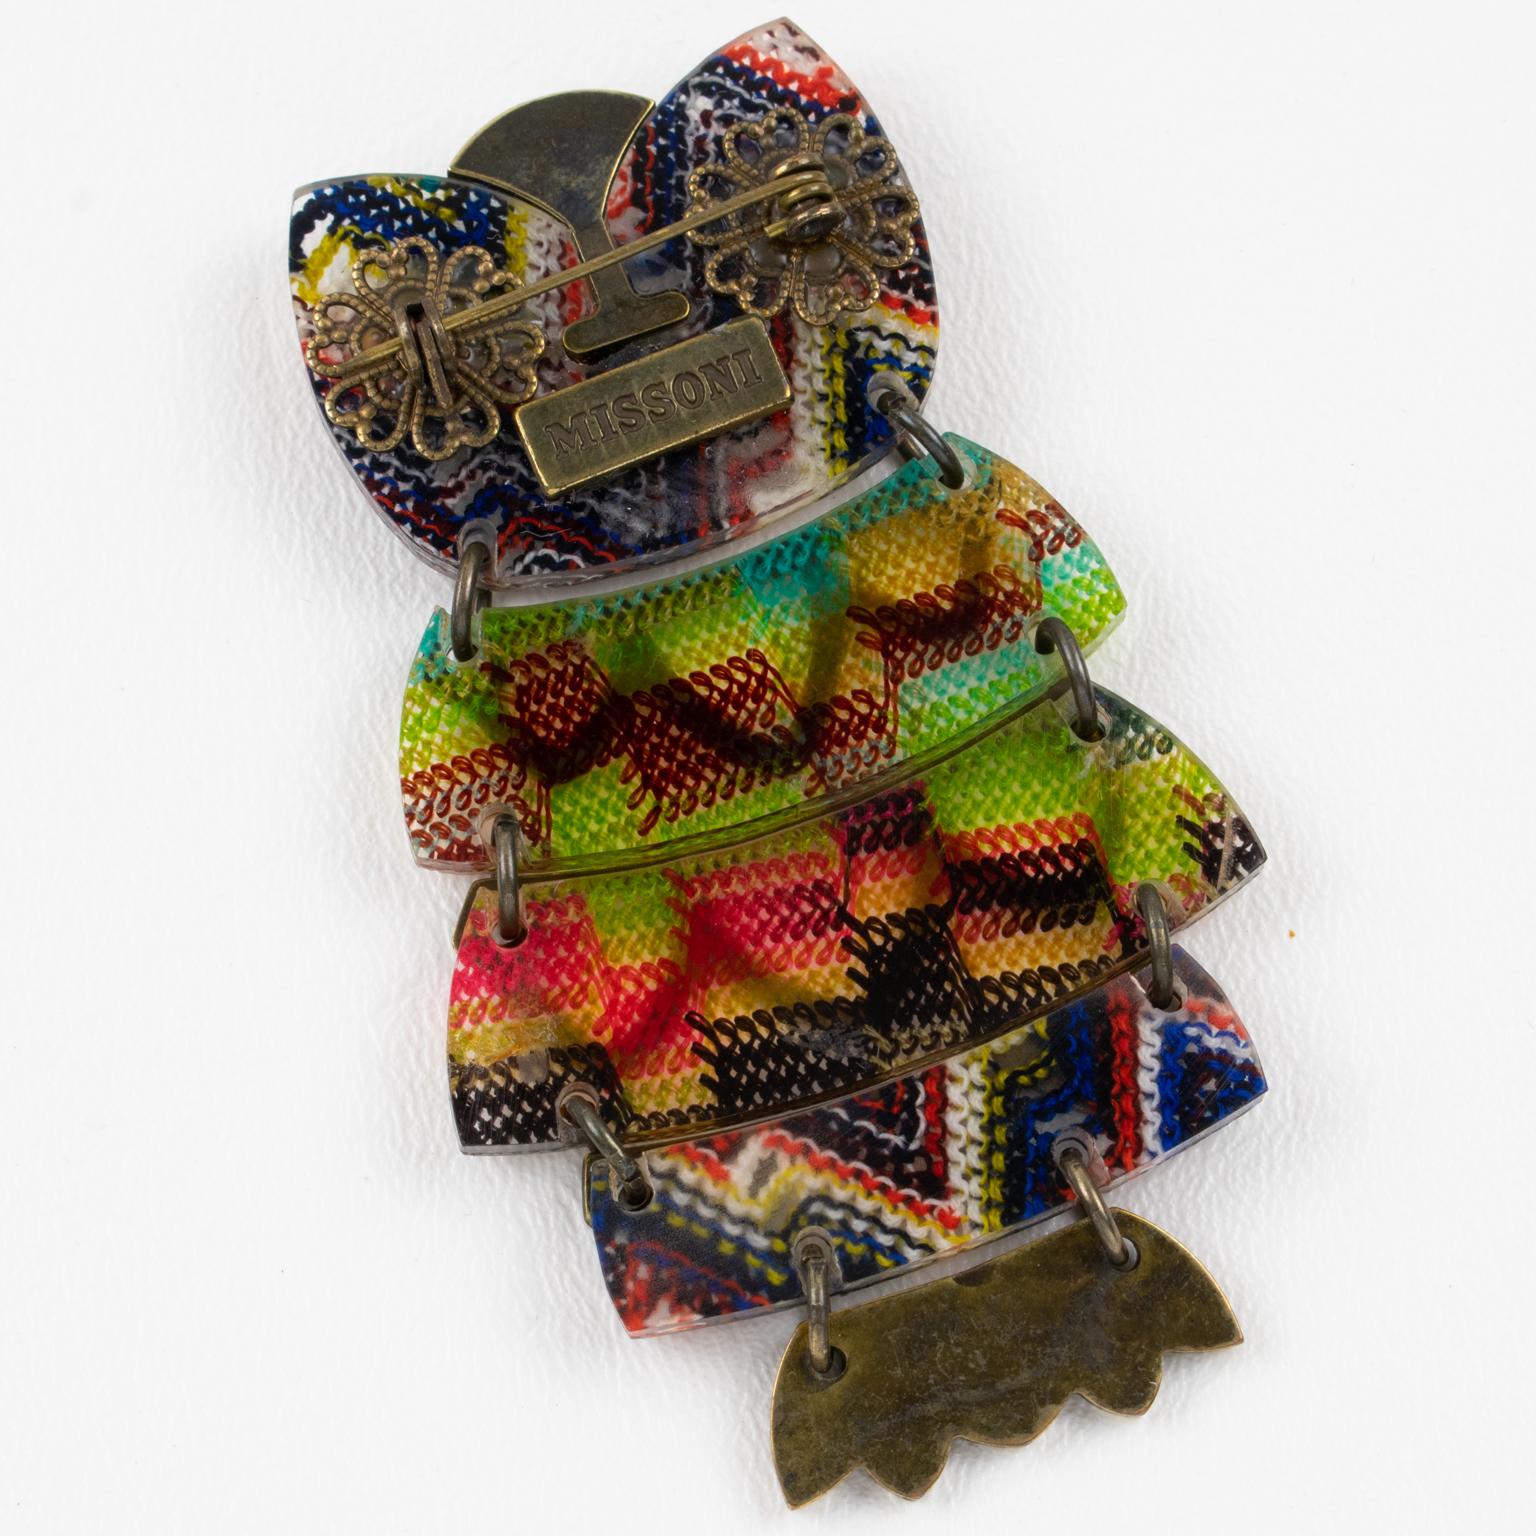 Missoni Italy Brass and Knitted Fabric Jeweled Owl Pin Brooch In Excellent Condition For Sale In Atlanta, GA